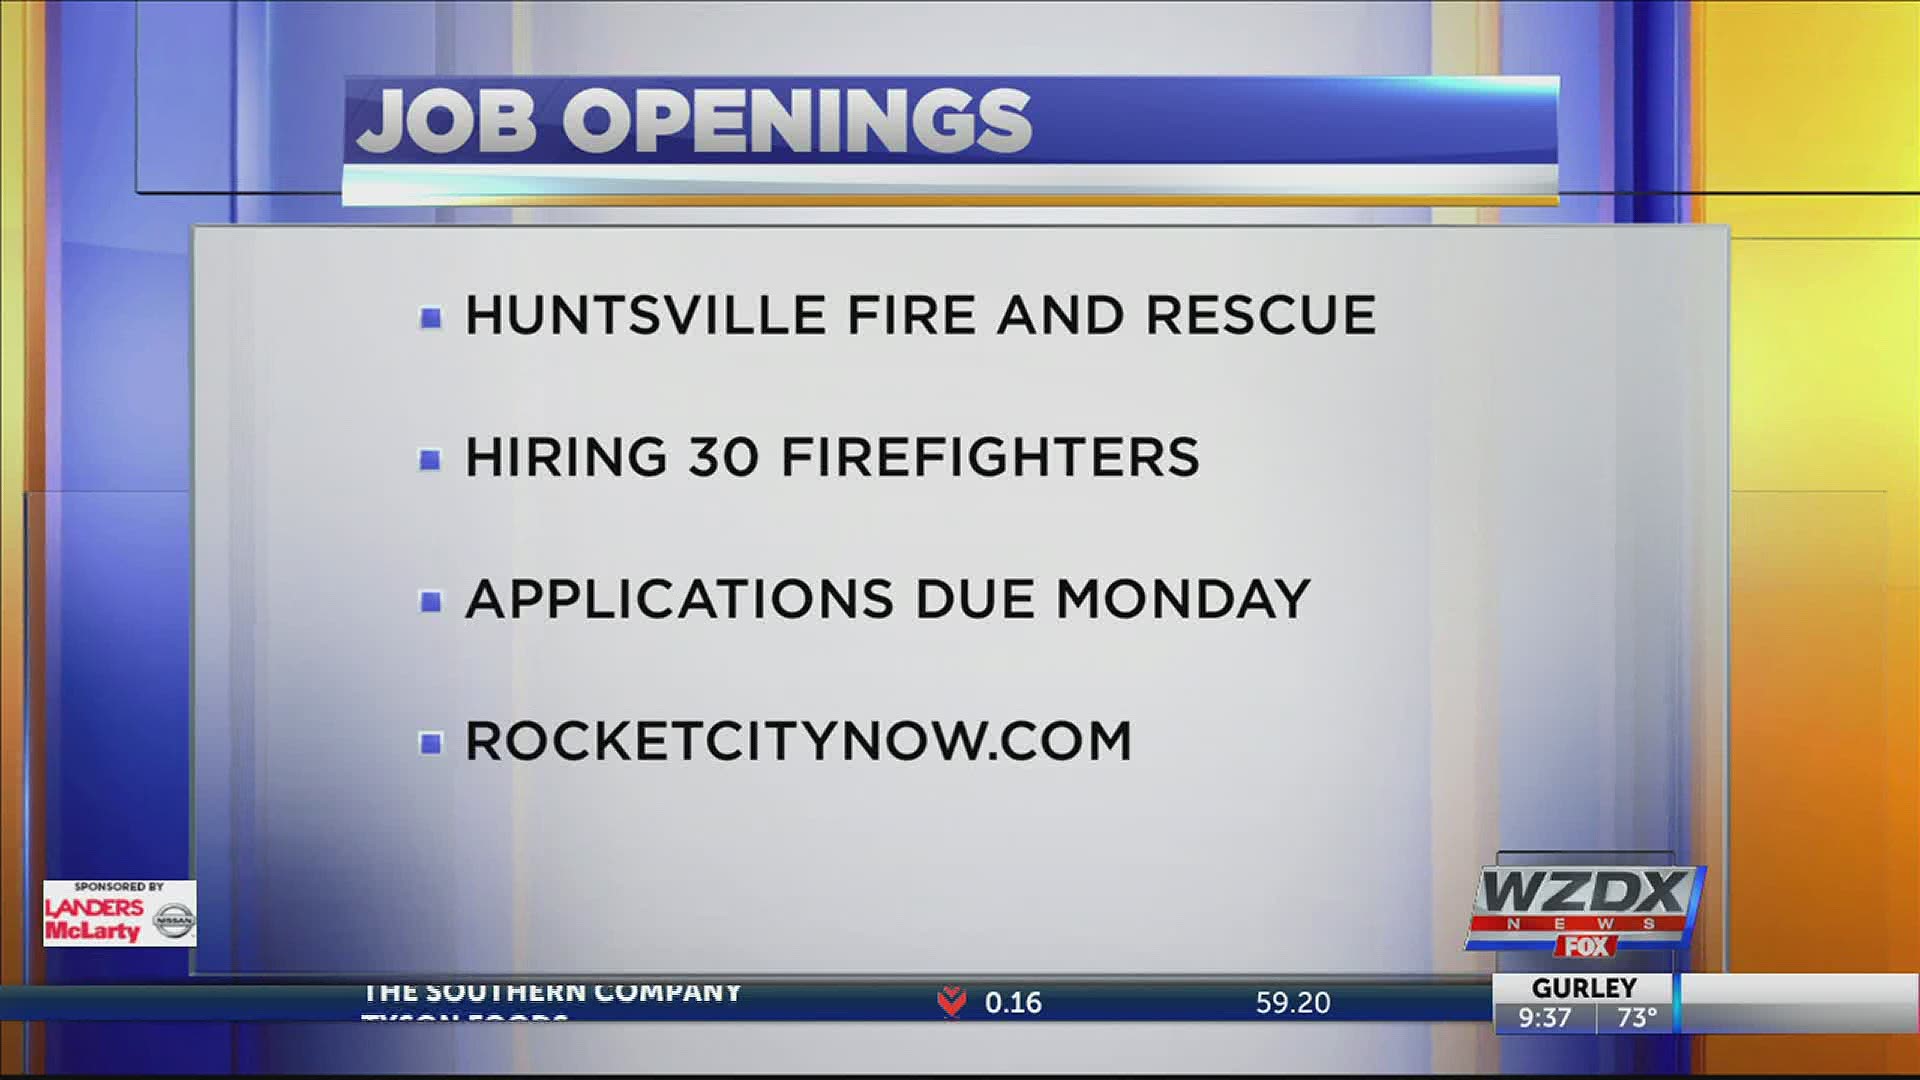 Applications for Fire & Rescue only open about every 18-months.